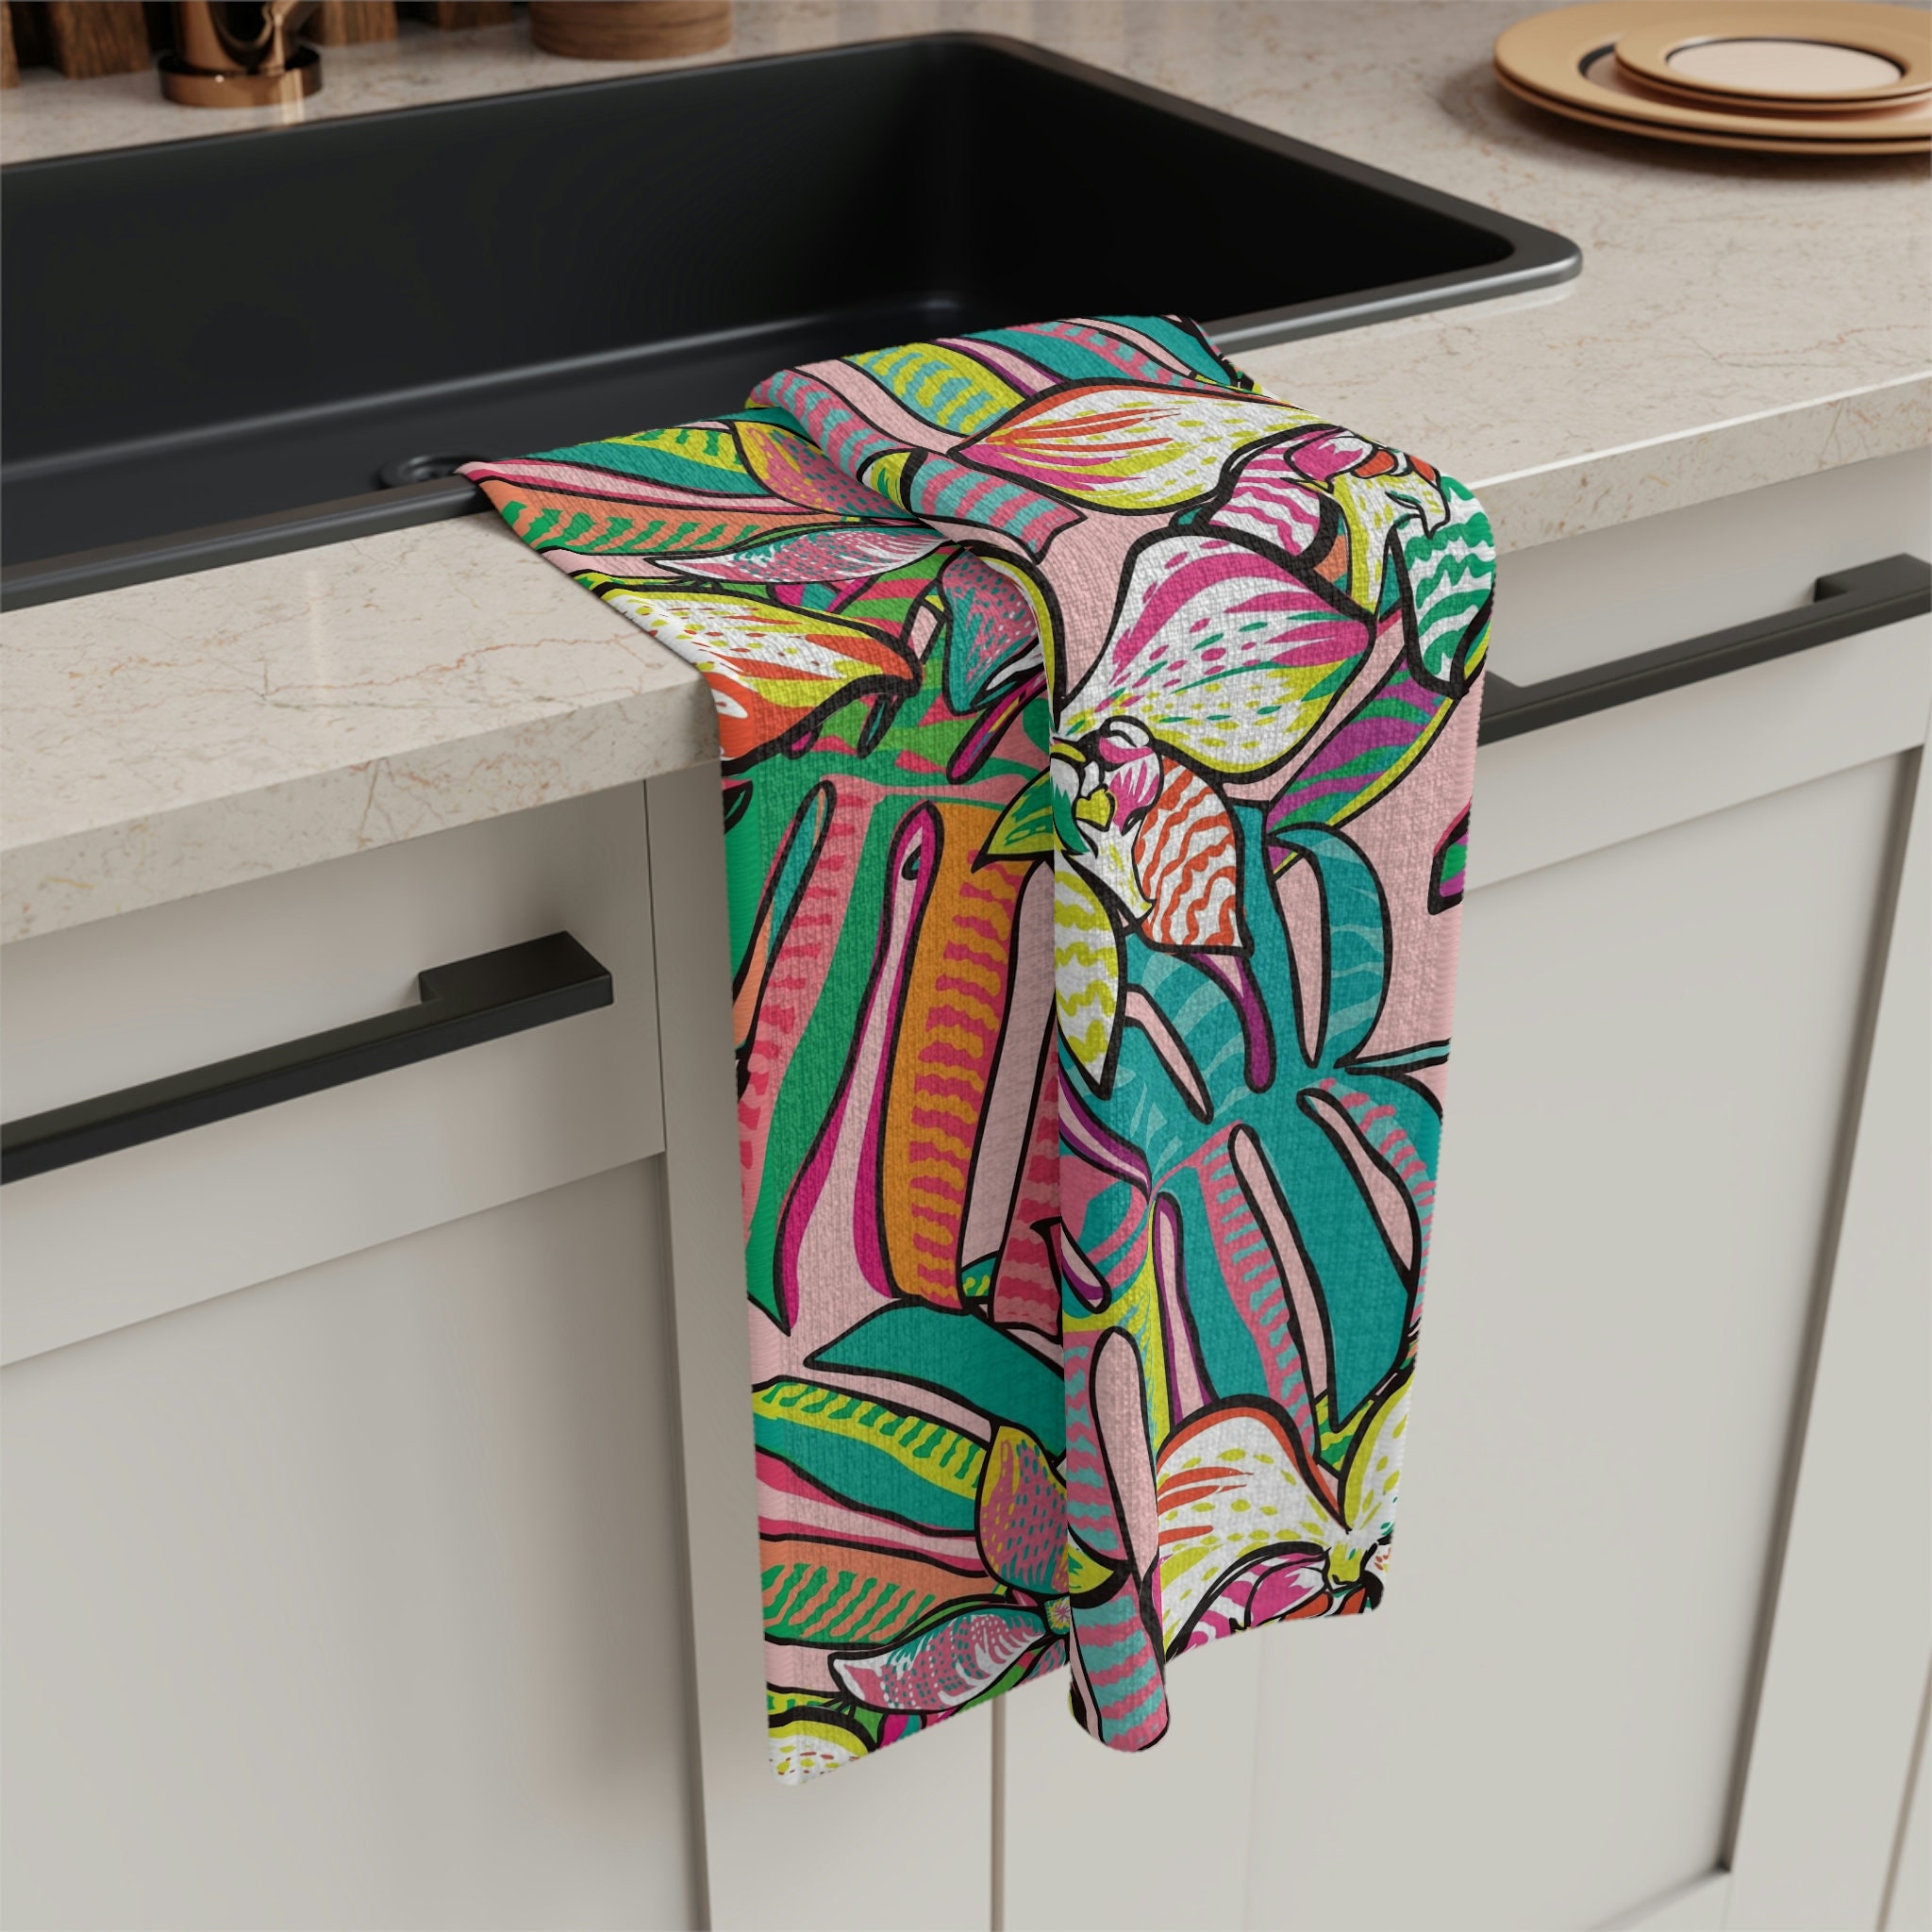  Beach Kitchen Towels, Summer Gifts for Women, 2 Pack